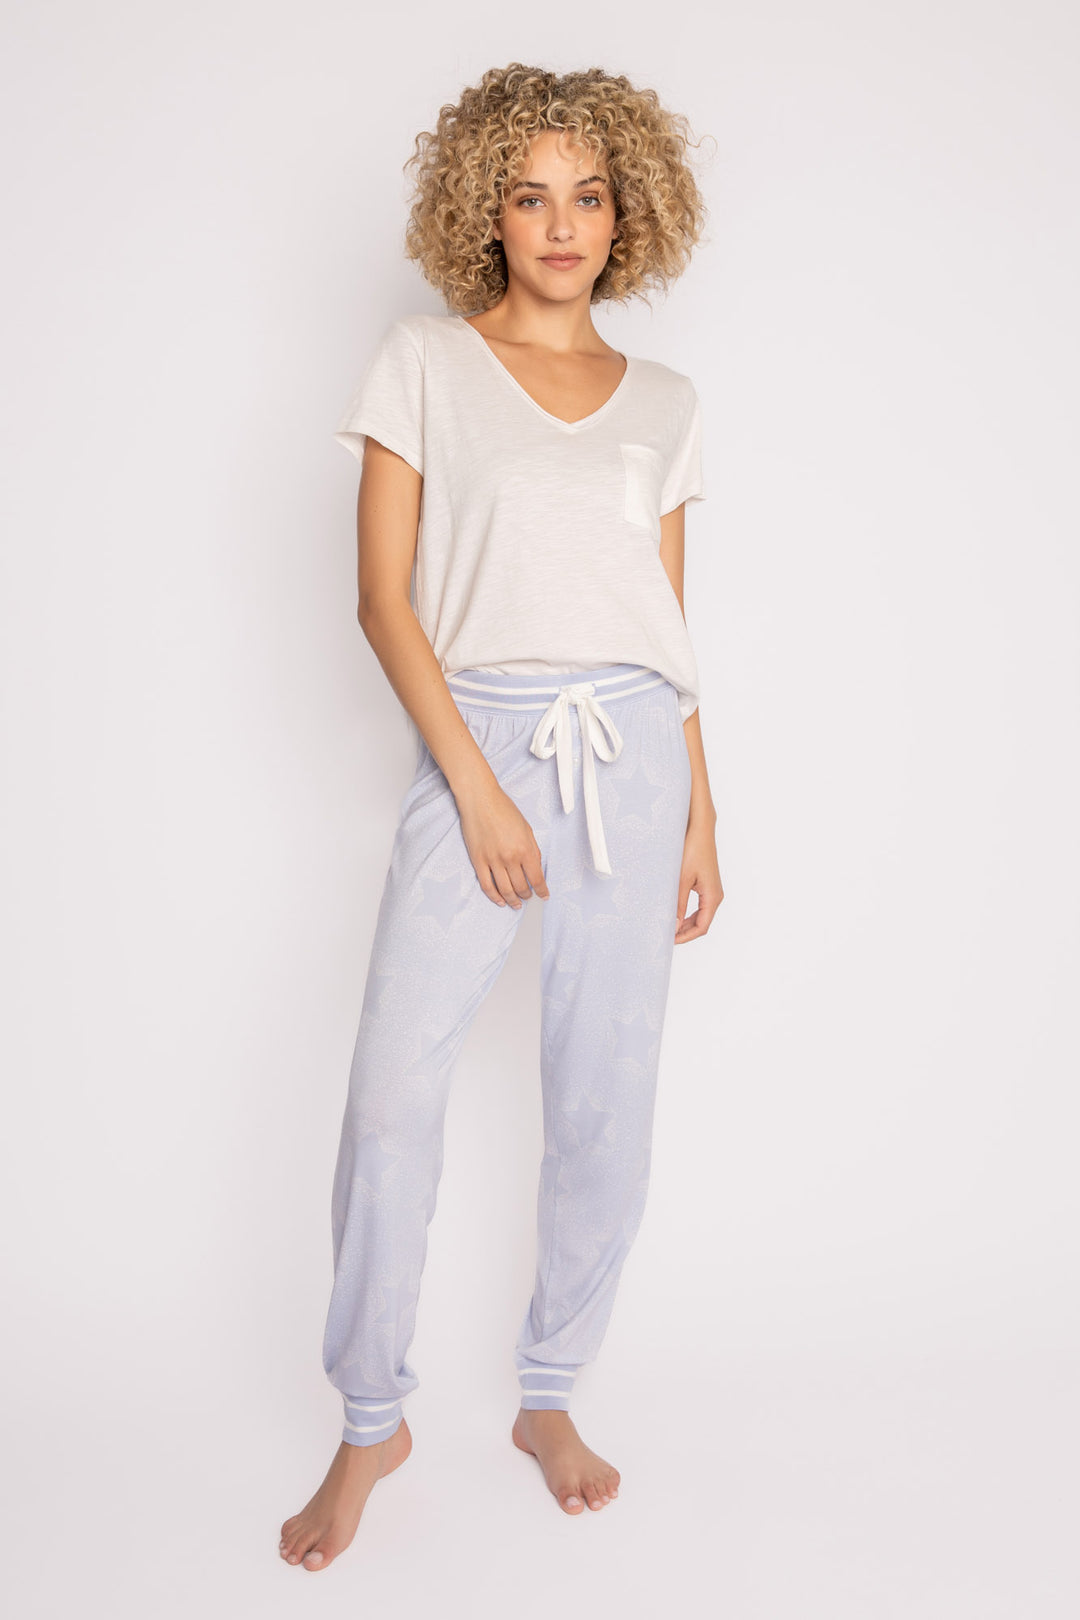 Luxe aloe-infused jersey pajama pant in light blue with muted ivory star print. White striped cuffs. (7257680904292)